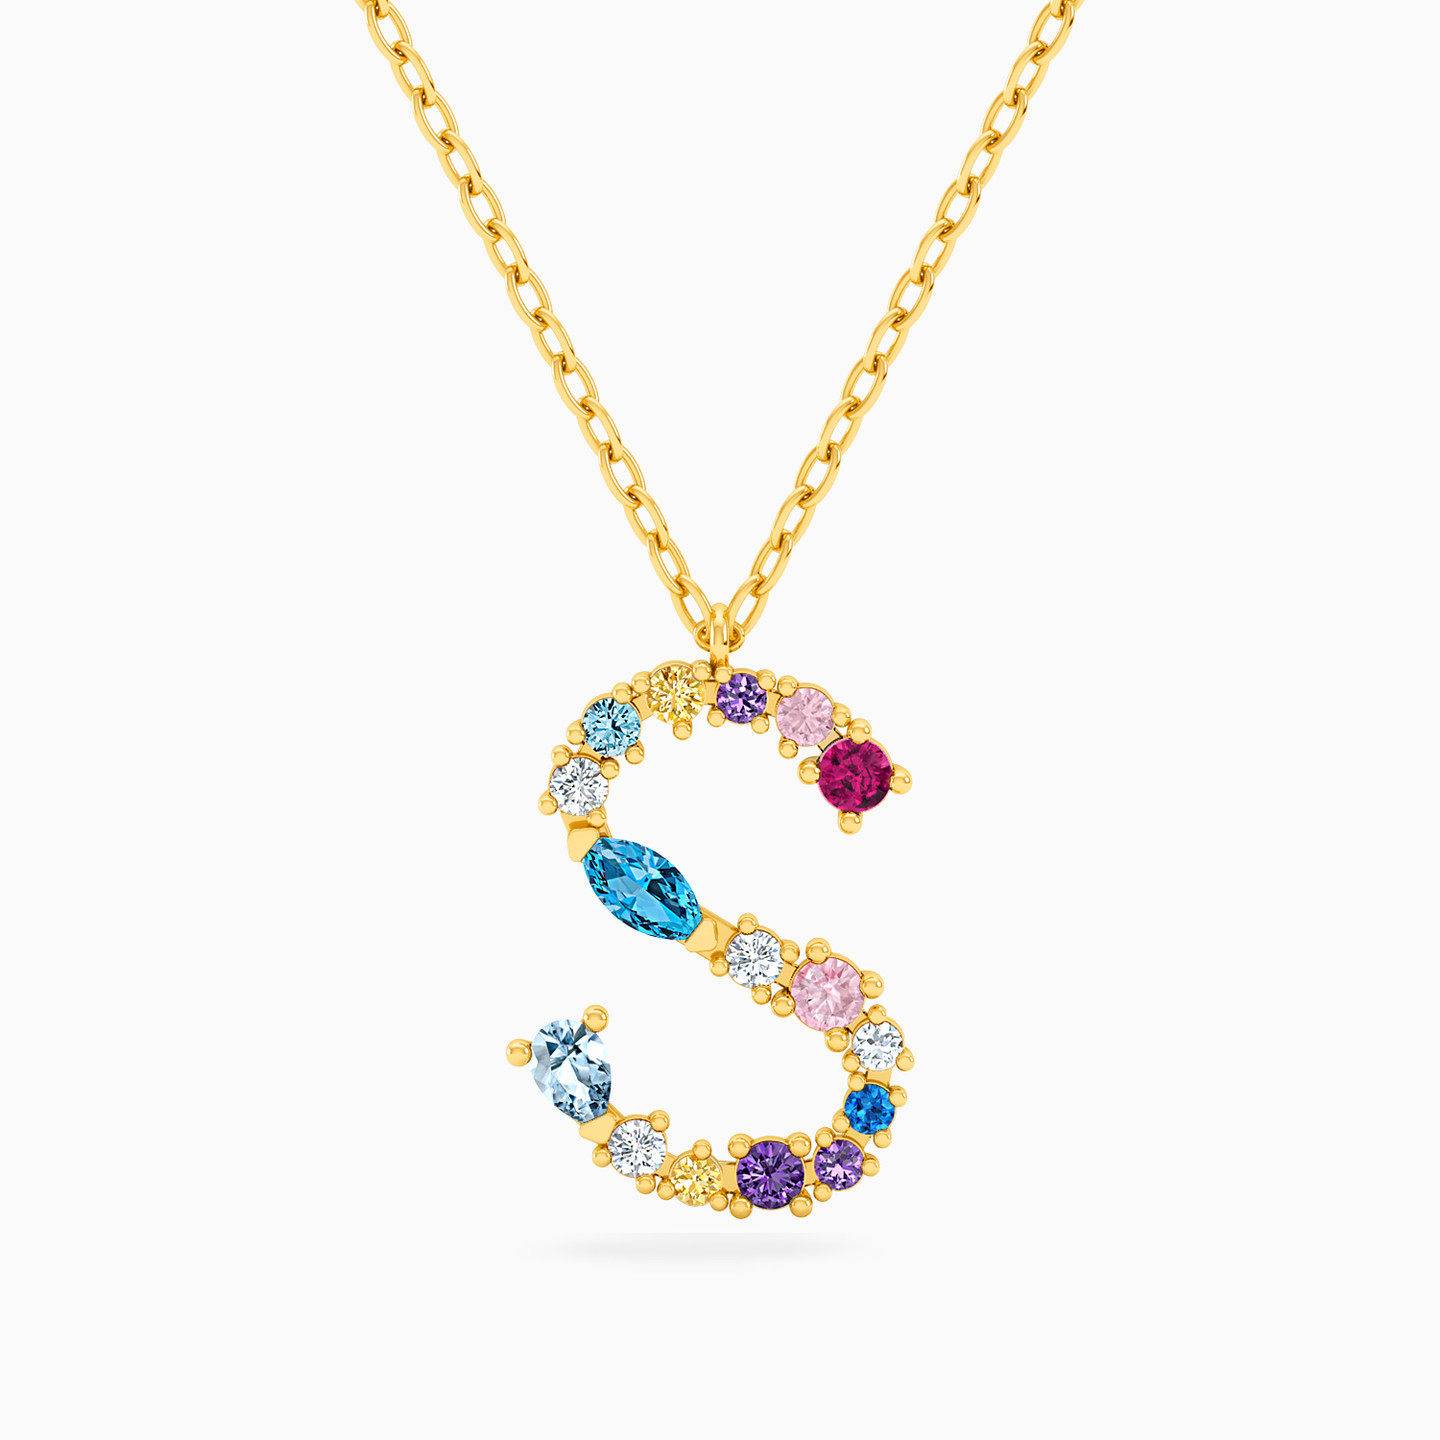 Letter S Shaped Colored Stones Pendant with 18K Gold Chain